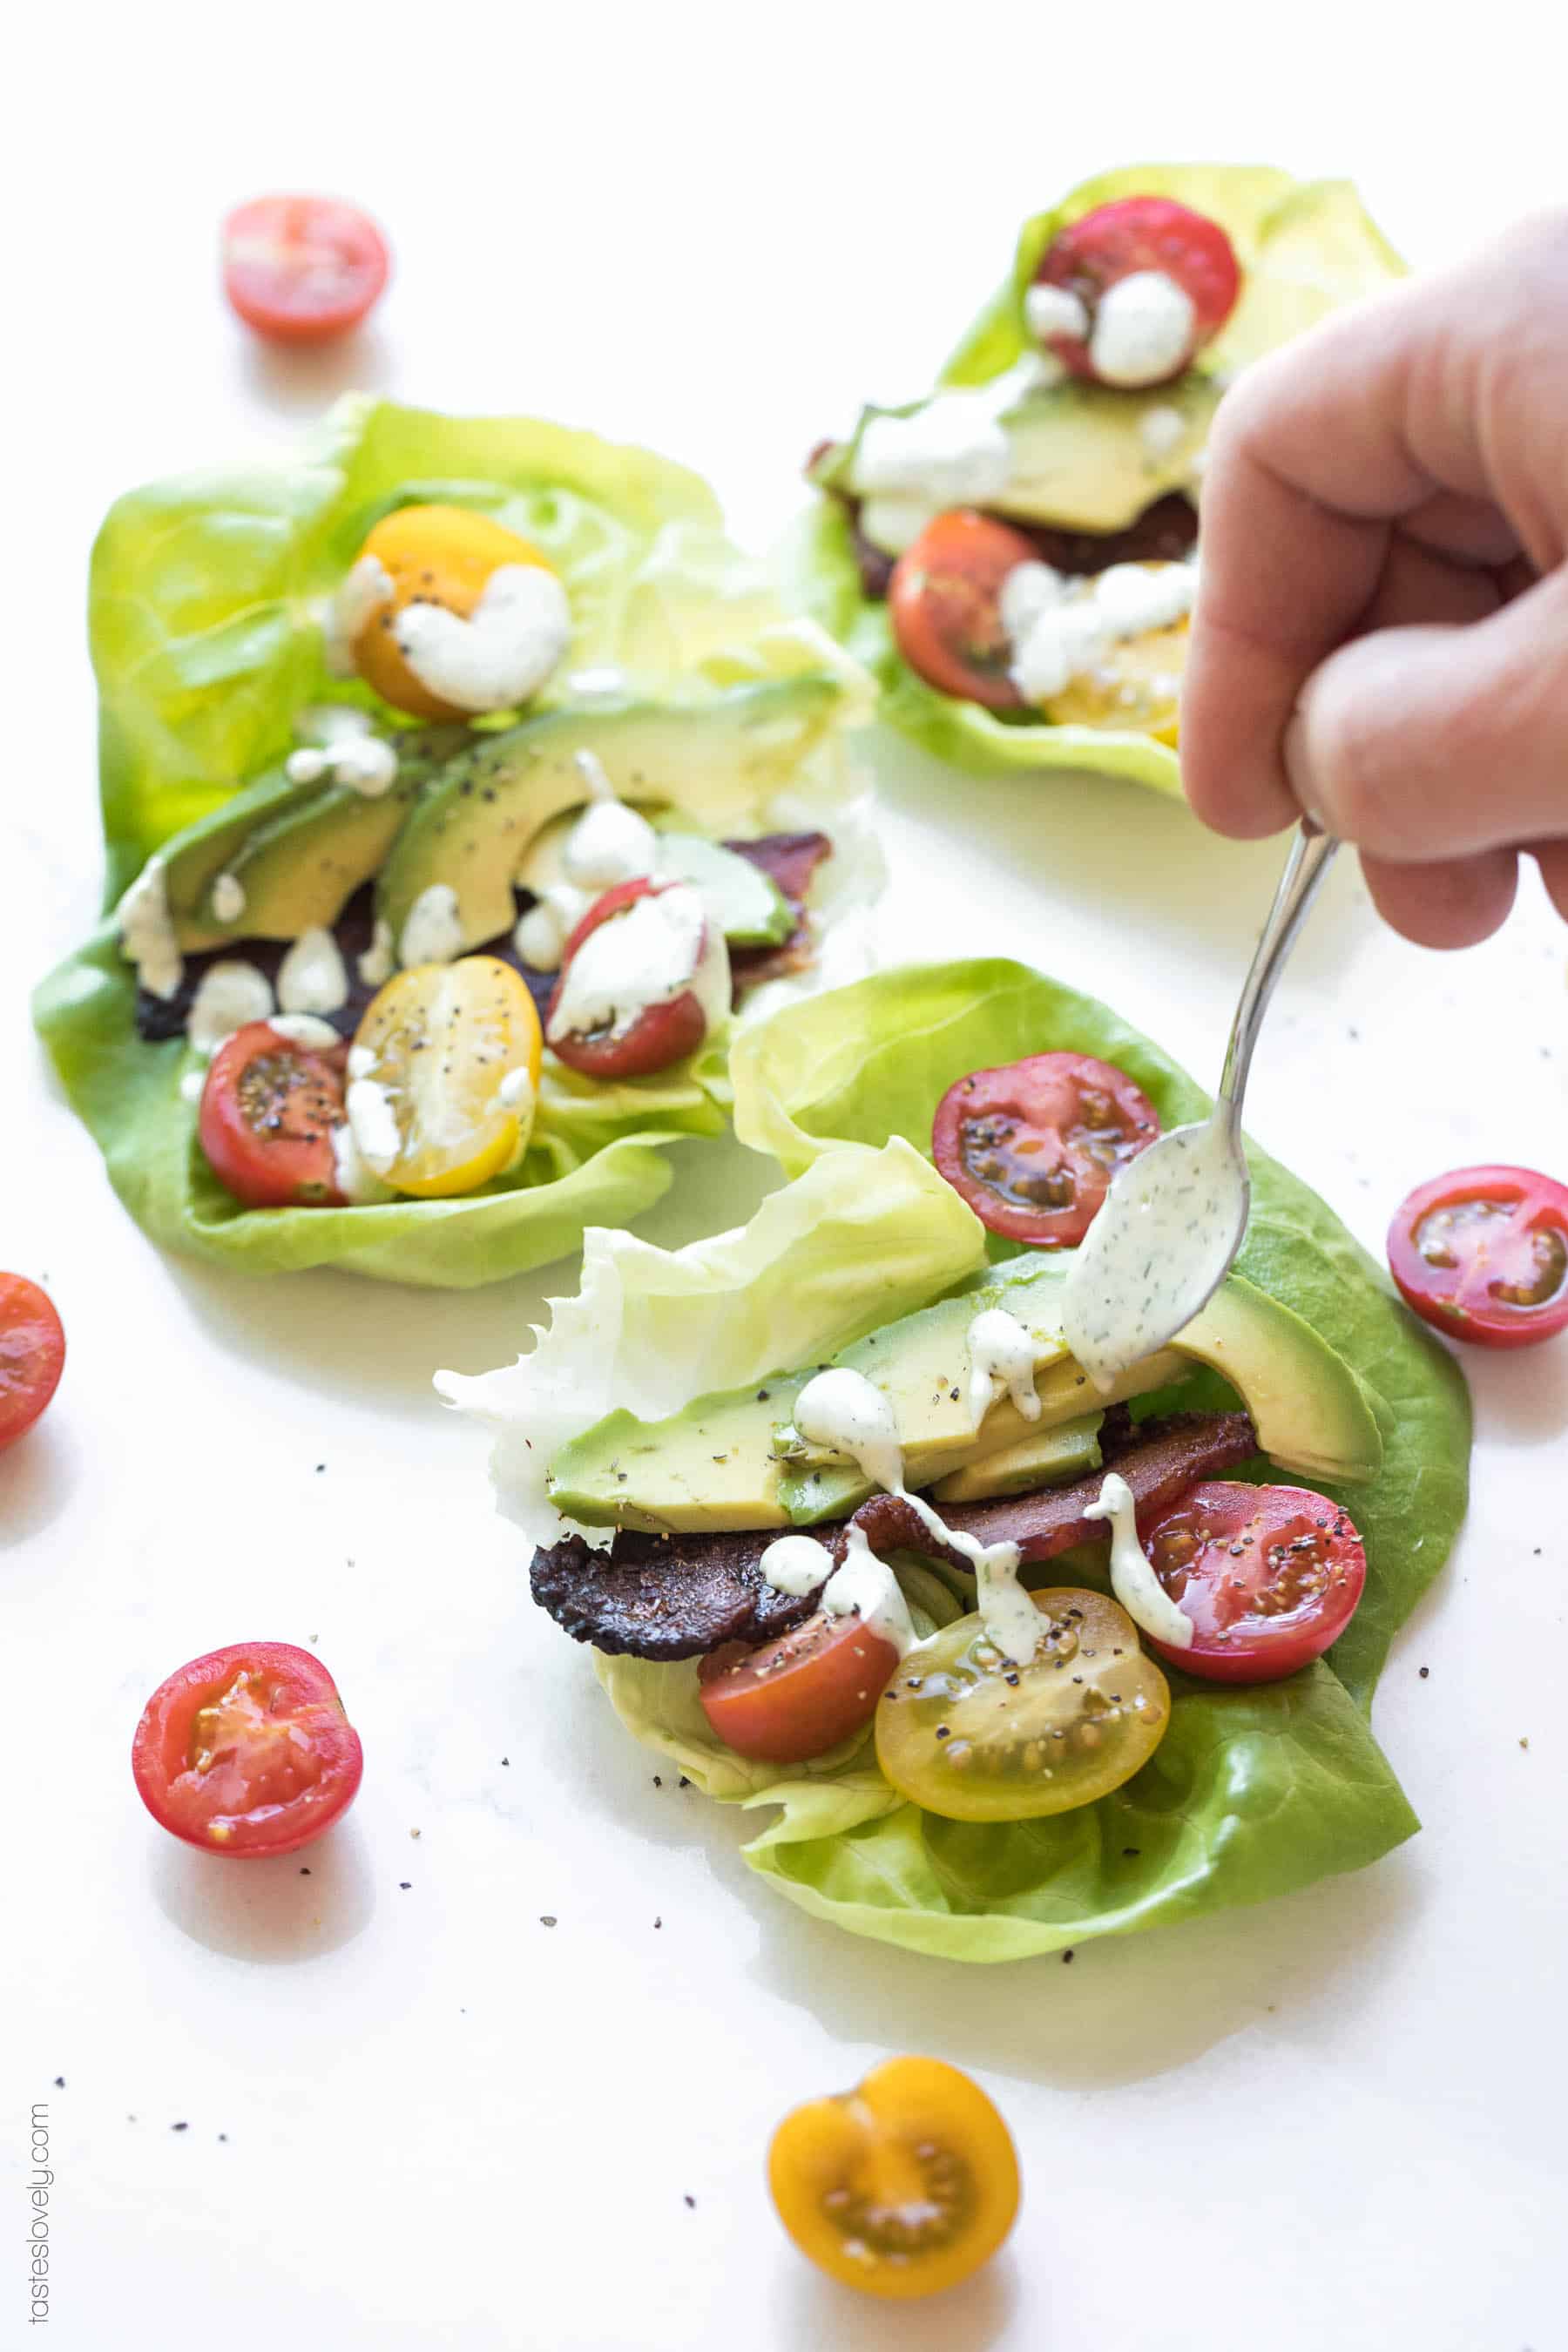 Paleo, Whole30 + Keto BLT Lettuce Wraps Recipe with avocado ranch dressing - a healthy and delicious lunch, dinner or appetizer. #paleo #whole30 #keto #glutenfree #grainfree #dairyfree #lowcarb #sugarfree #cleaneating #realfood